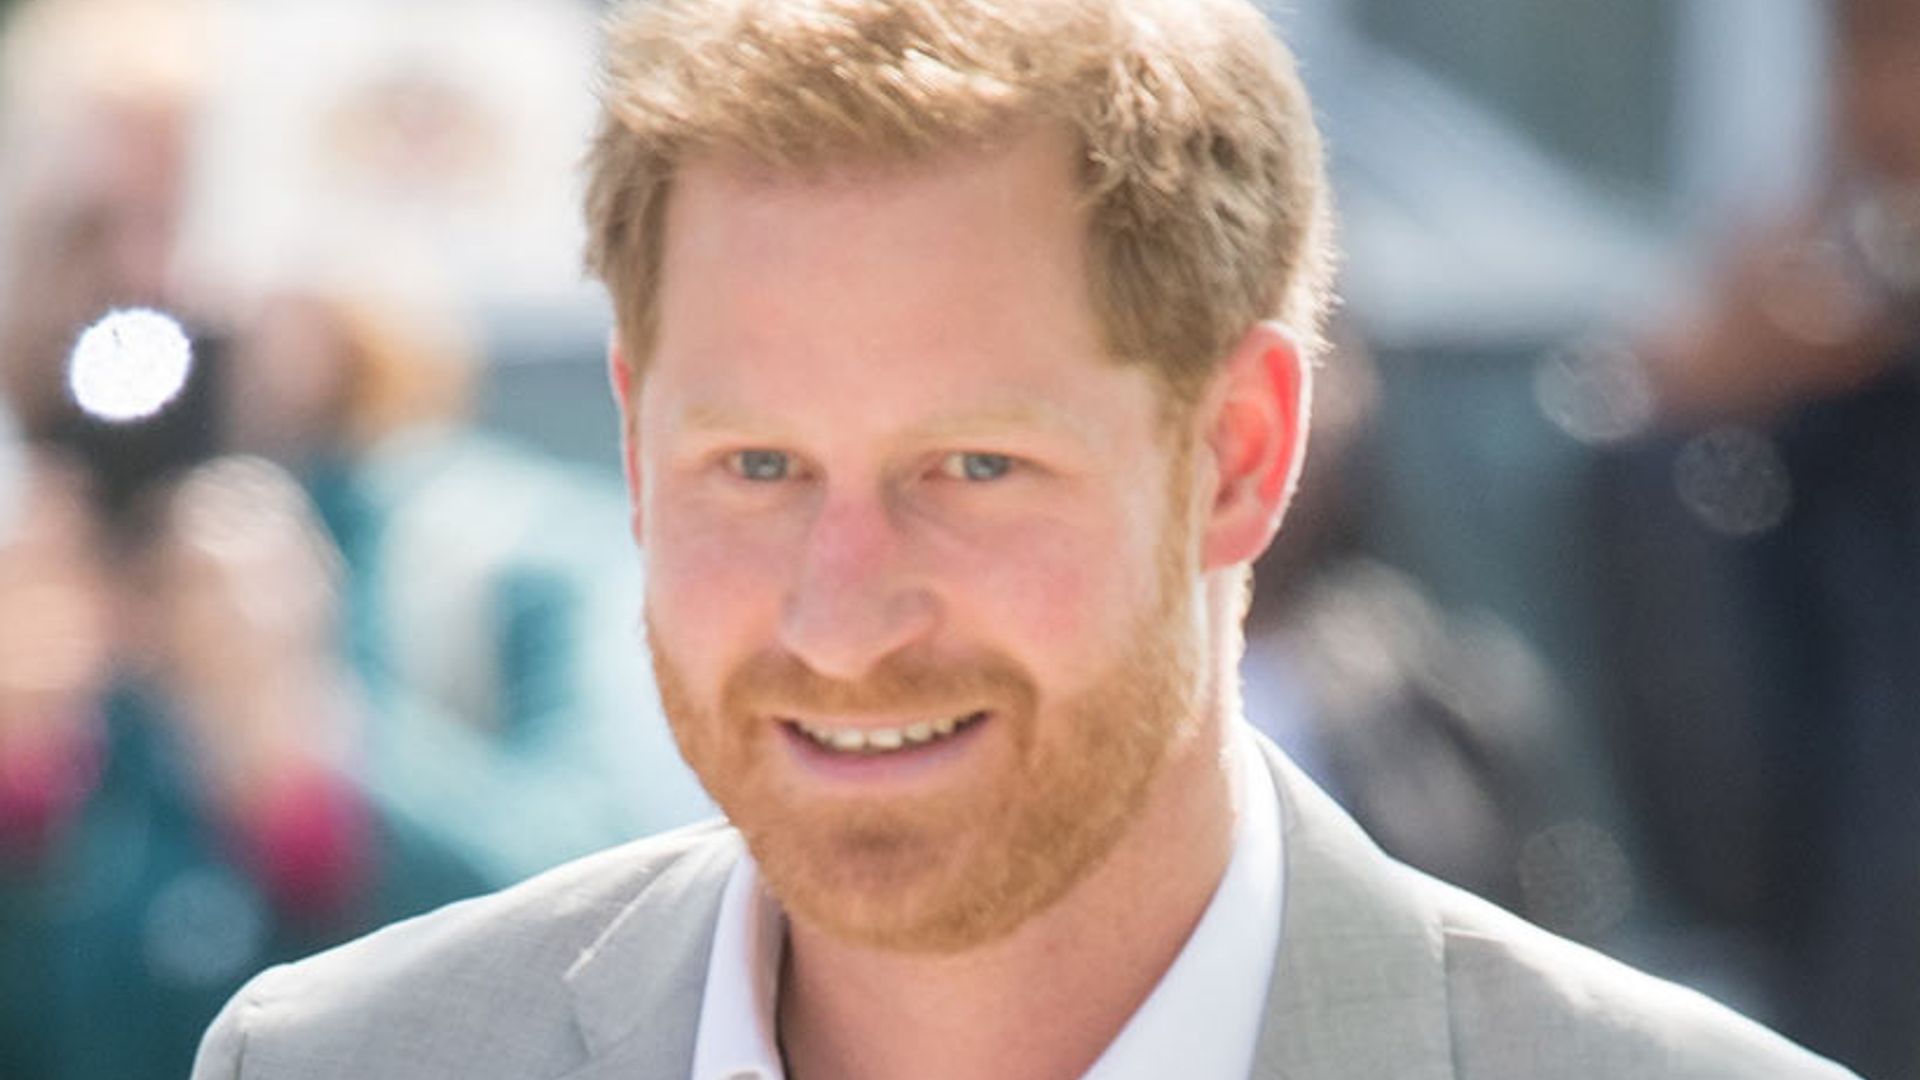 The sweet reason why Prince Harry will ‘immediately connect’ with his son